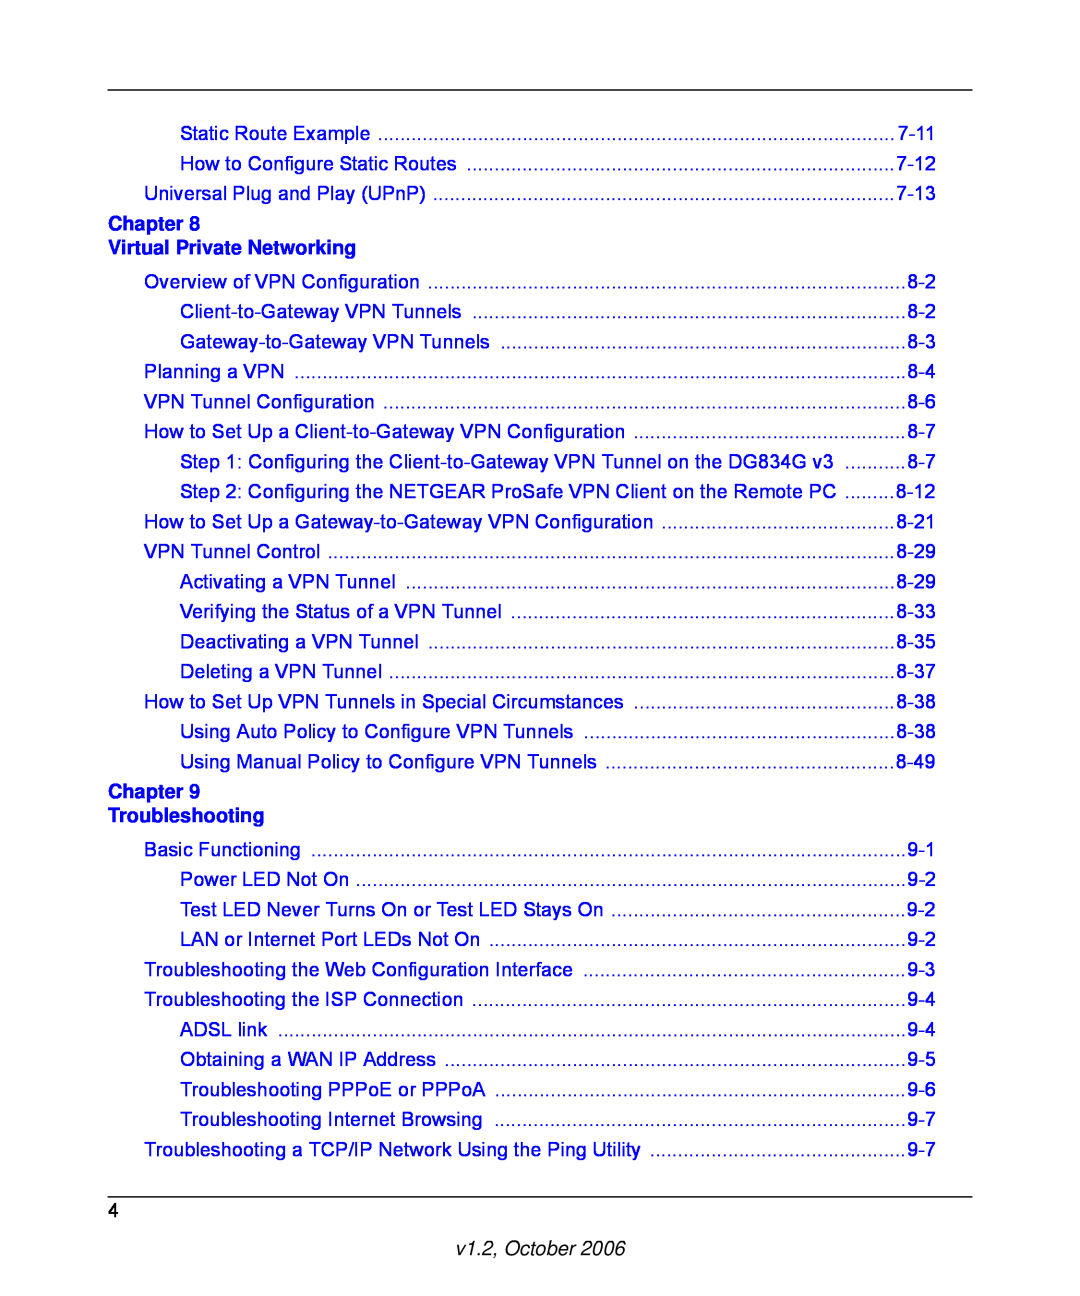 NETGEAR DG834G manual Chapter, Virtual Private Networking, Troubleshooting, v1.2, October 